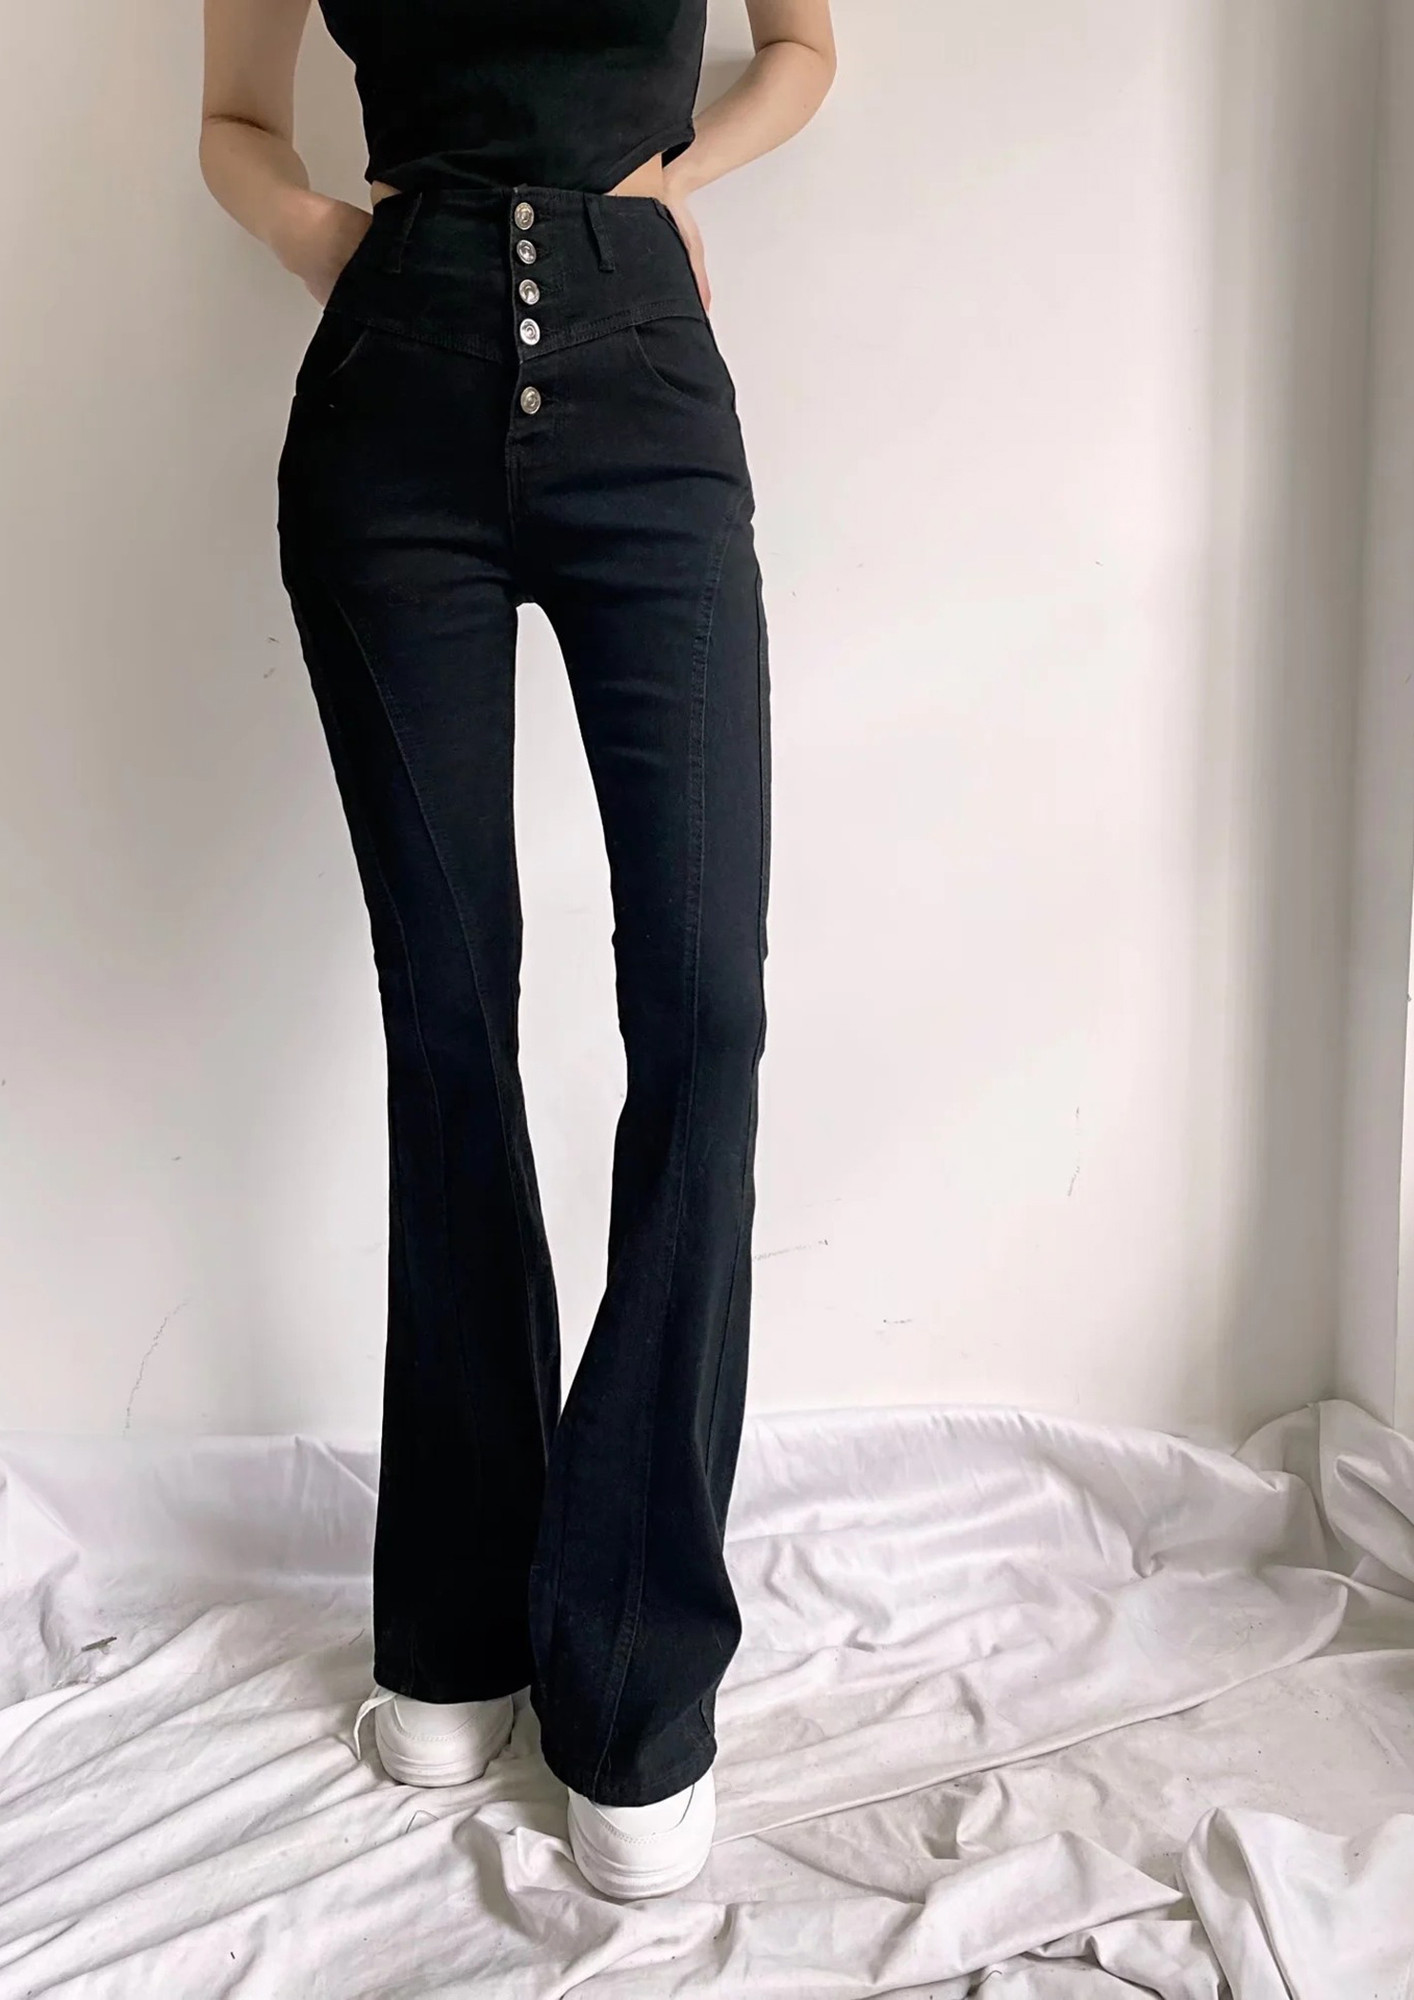 Buy Button Down Bell Bottom Jeans, Bell Bottom Jeans Woman, High Waisted  Jeans, Online in India 